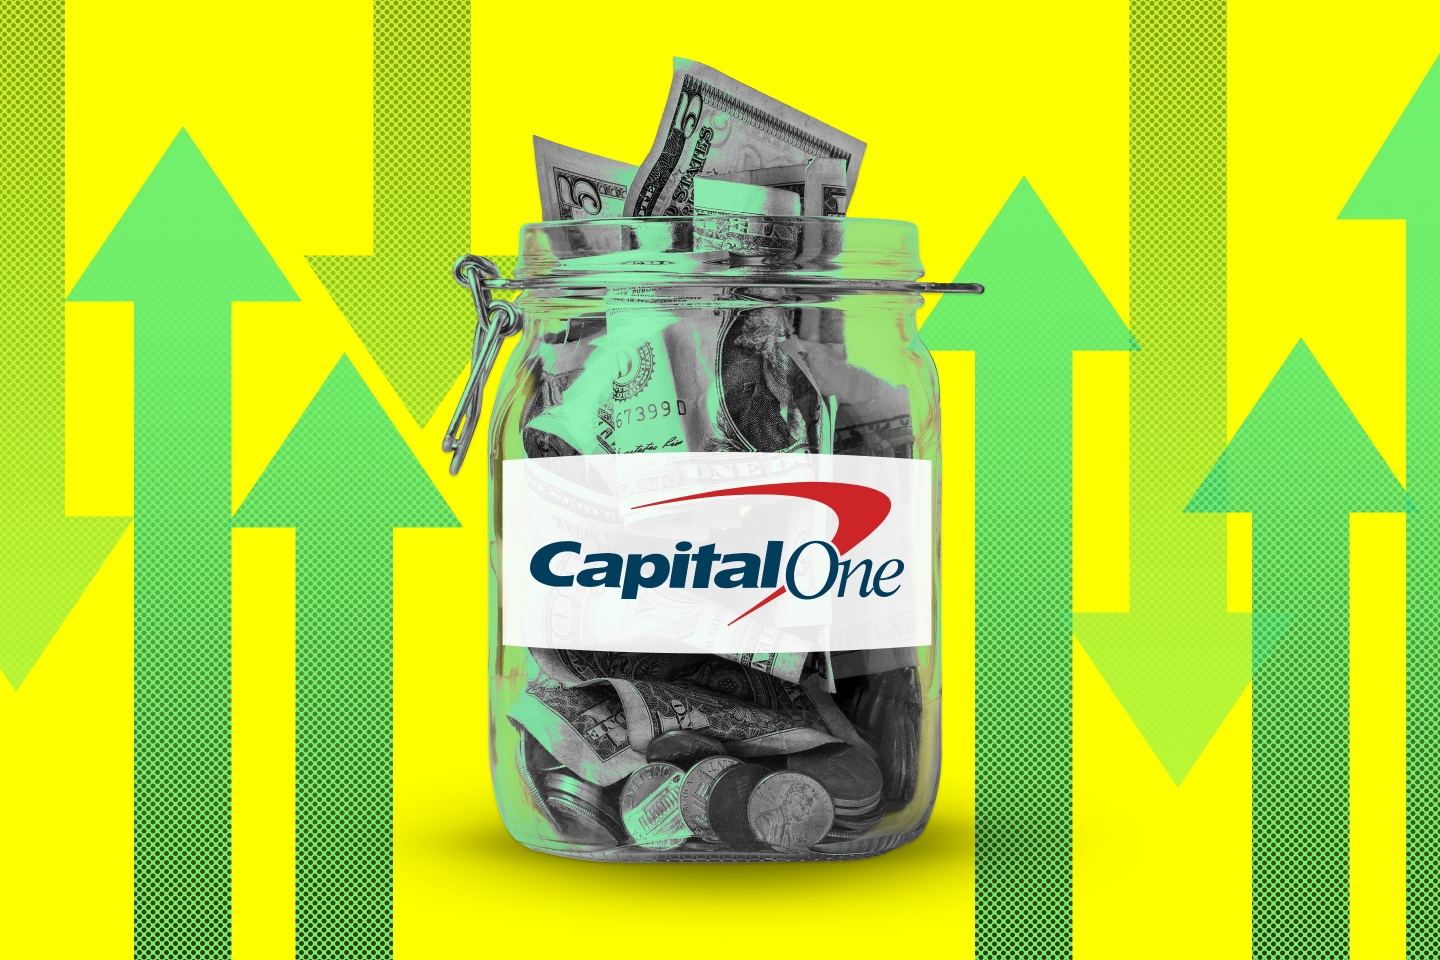 Photo illustration of a glass jar full or money that has the Capital One logo on the front, surrounded by arrows pointing up and down.